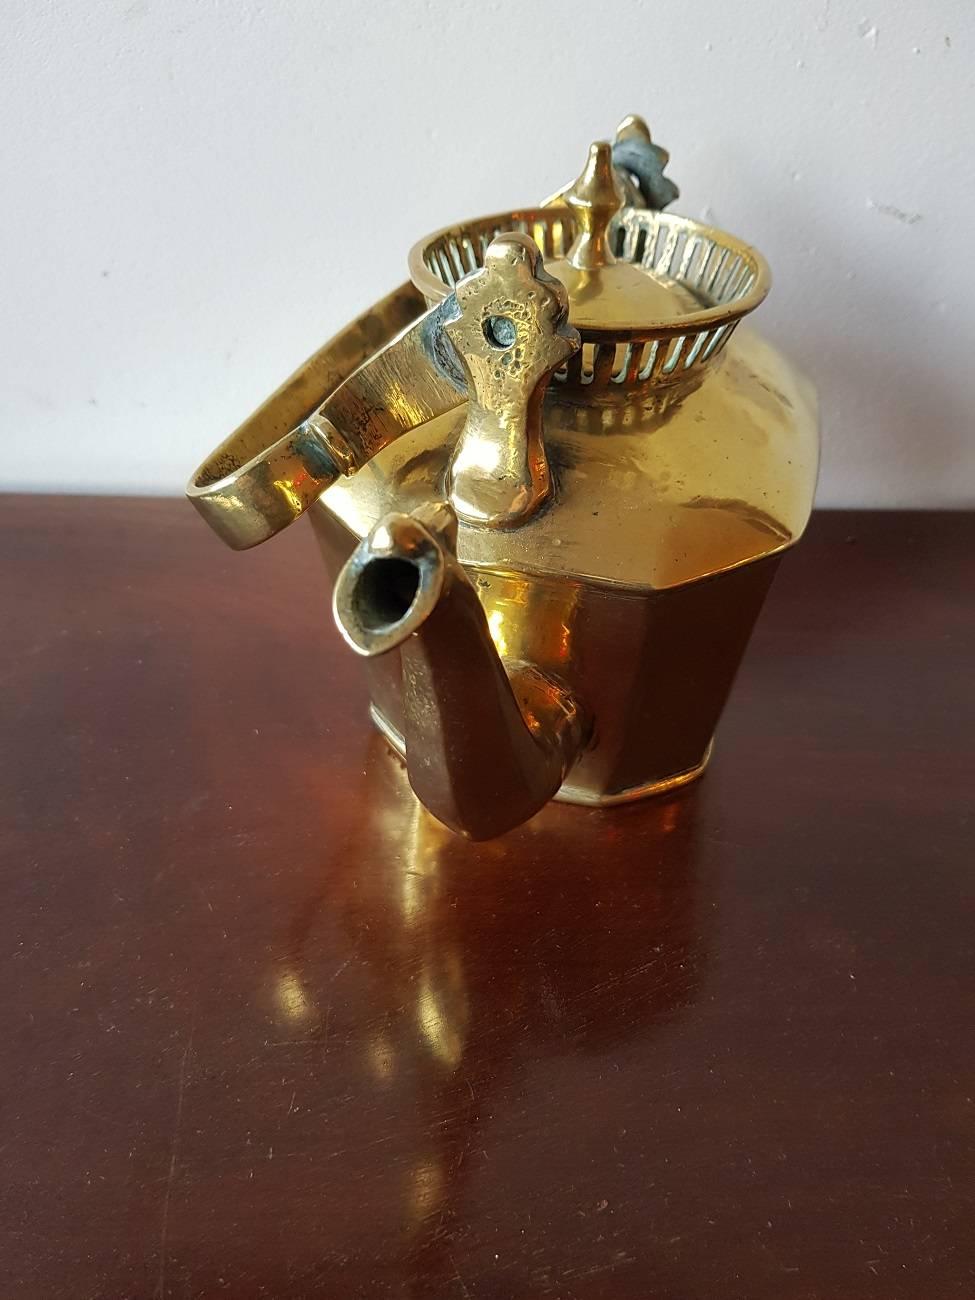 18th-19th century probably Dutch or English tea kettle made of cast brass except the bottom that is soldered into it and a heavy one for it's small size.

The measurements are:
Depth 12 cm/ 4.7 inch.
Width 21 cm/ 8.2 inch.
Height 15 cm/ 5.9